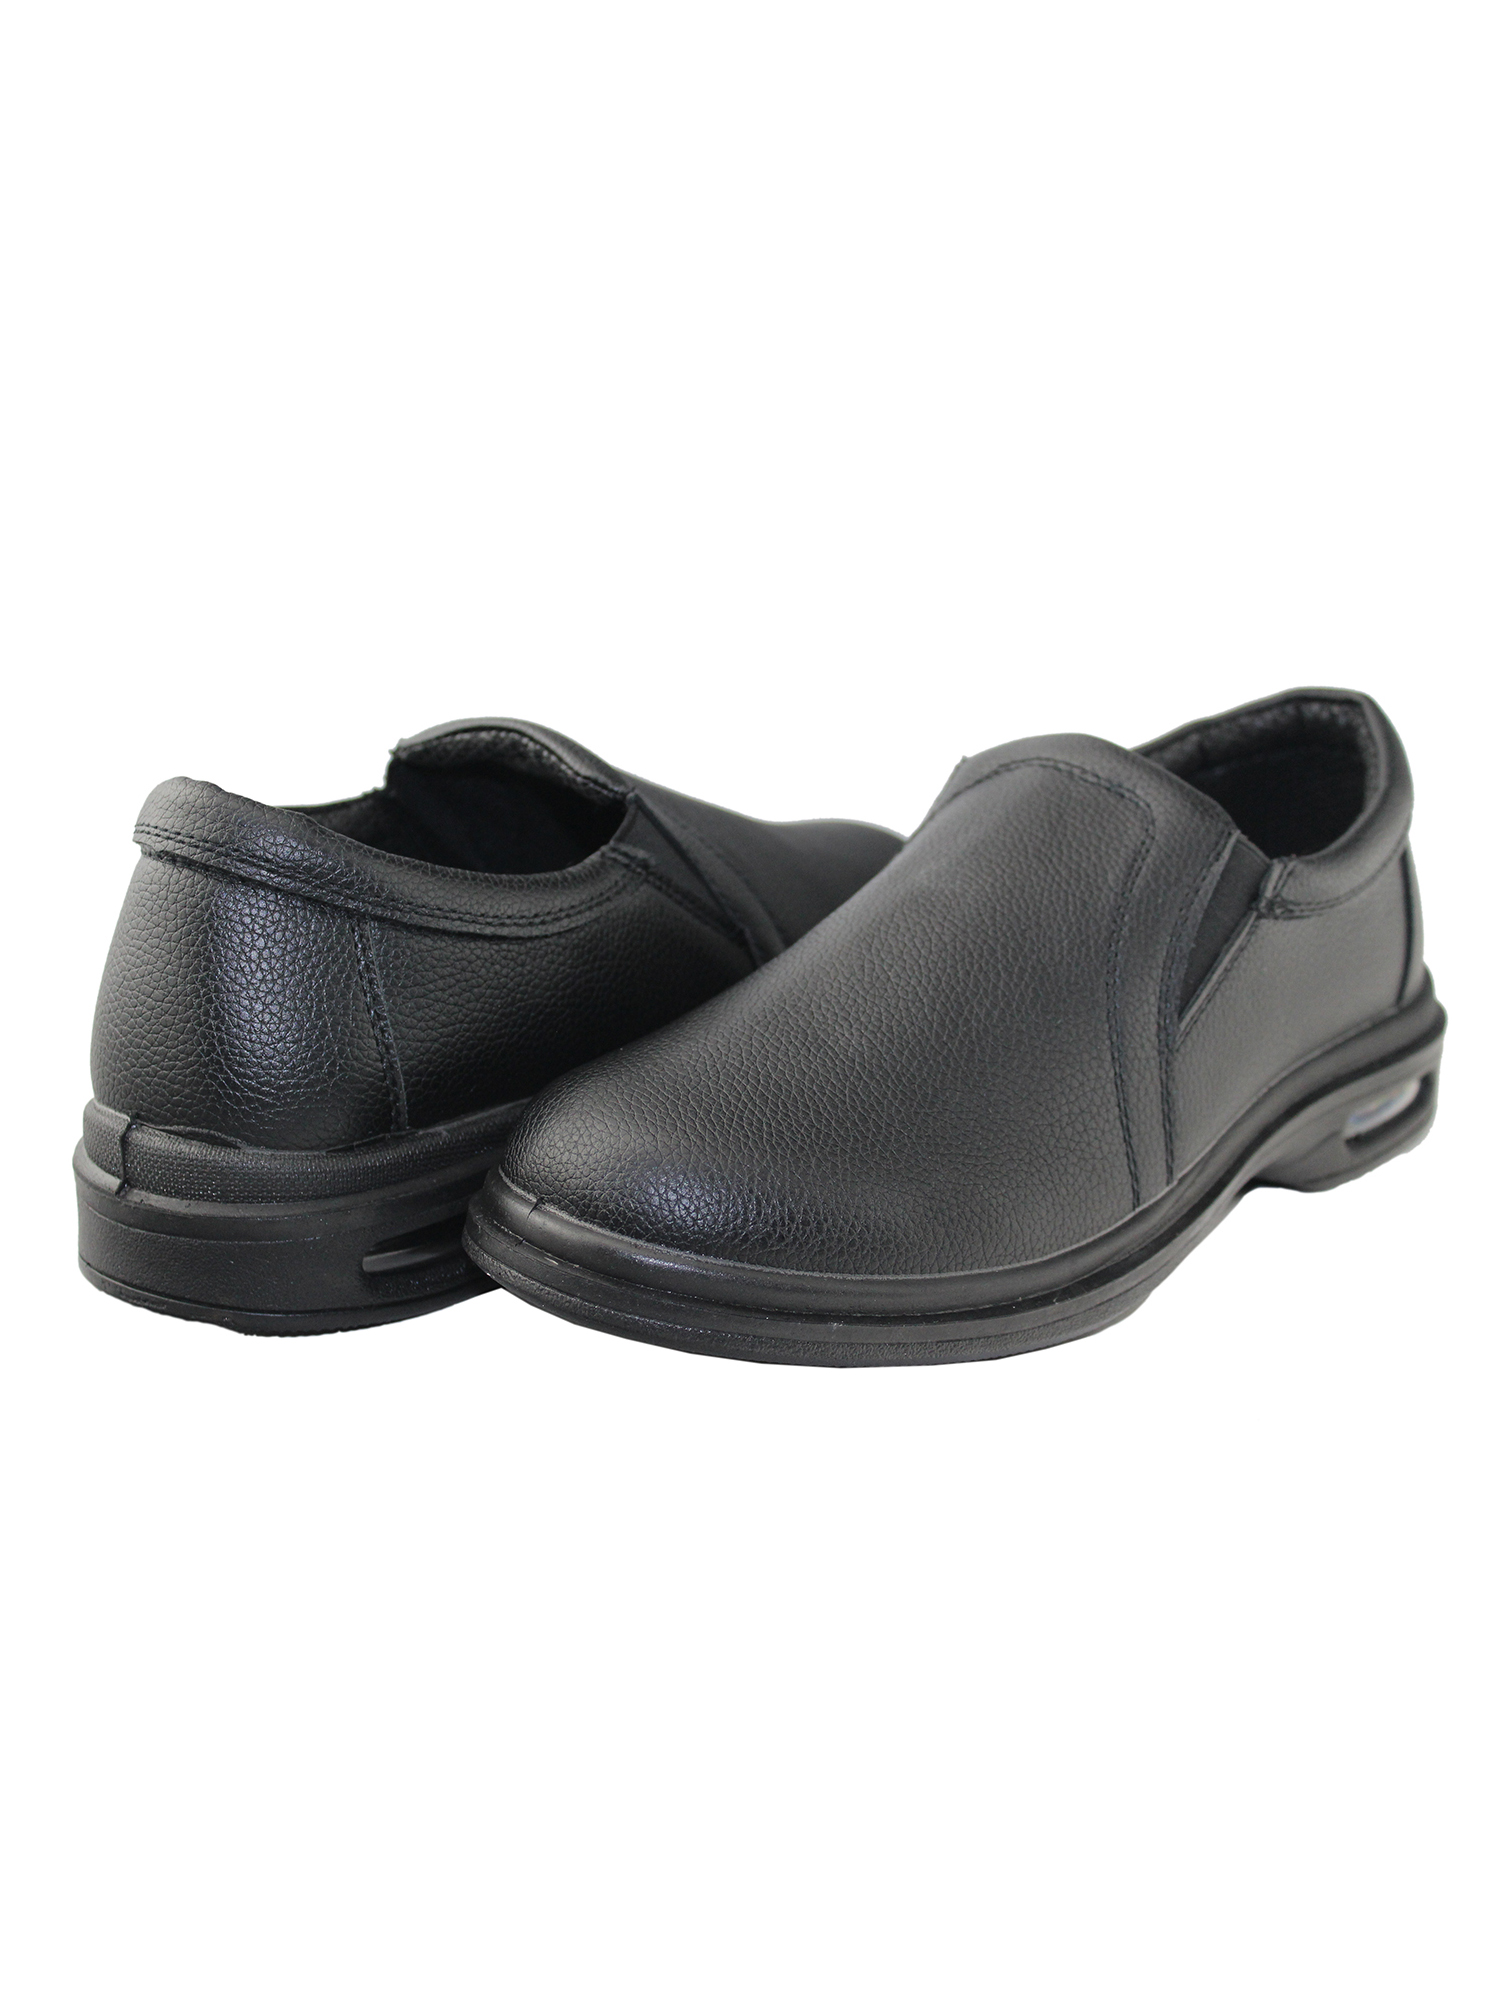 Mens Lightweight Non-Slip And Oil Resistant Shoes Autumn Winter Comfortable Air-Cushioning Casual Shoes - image 1 of 5